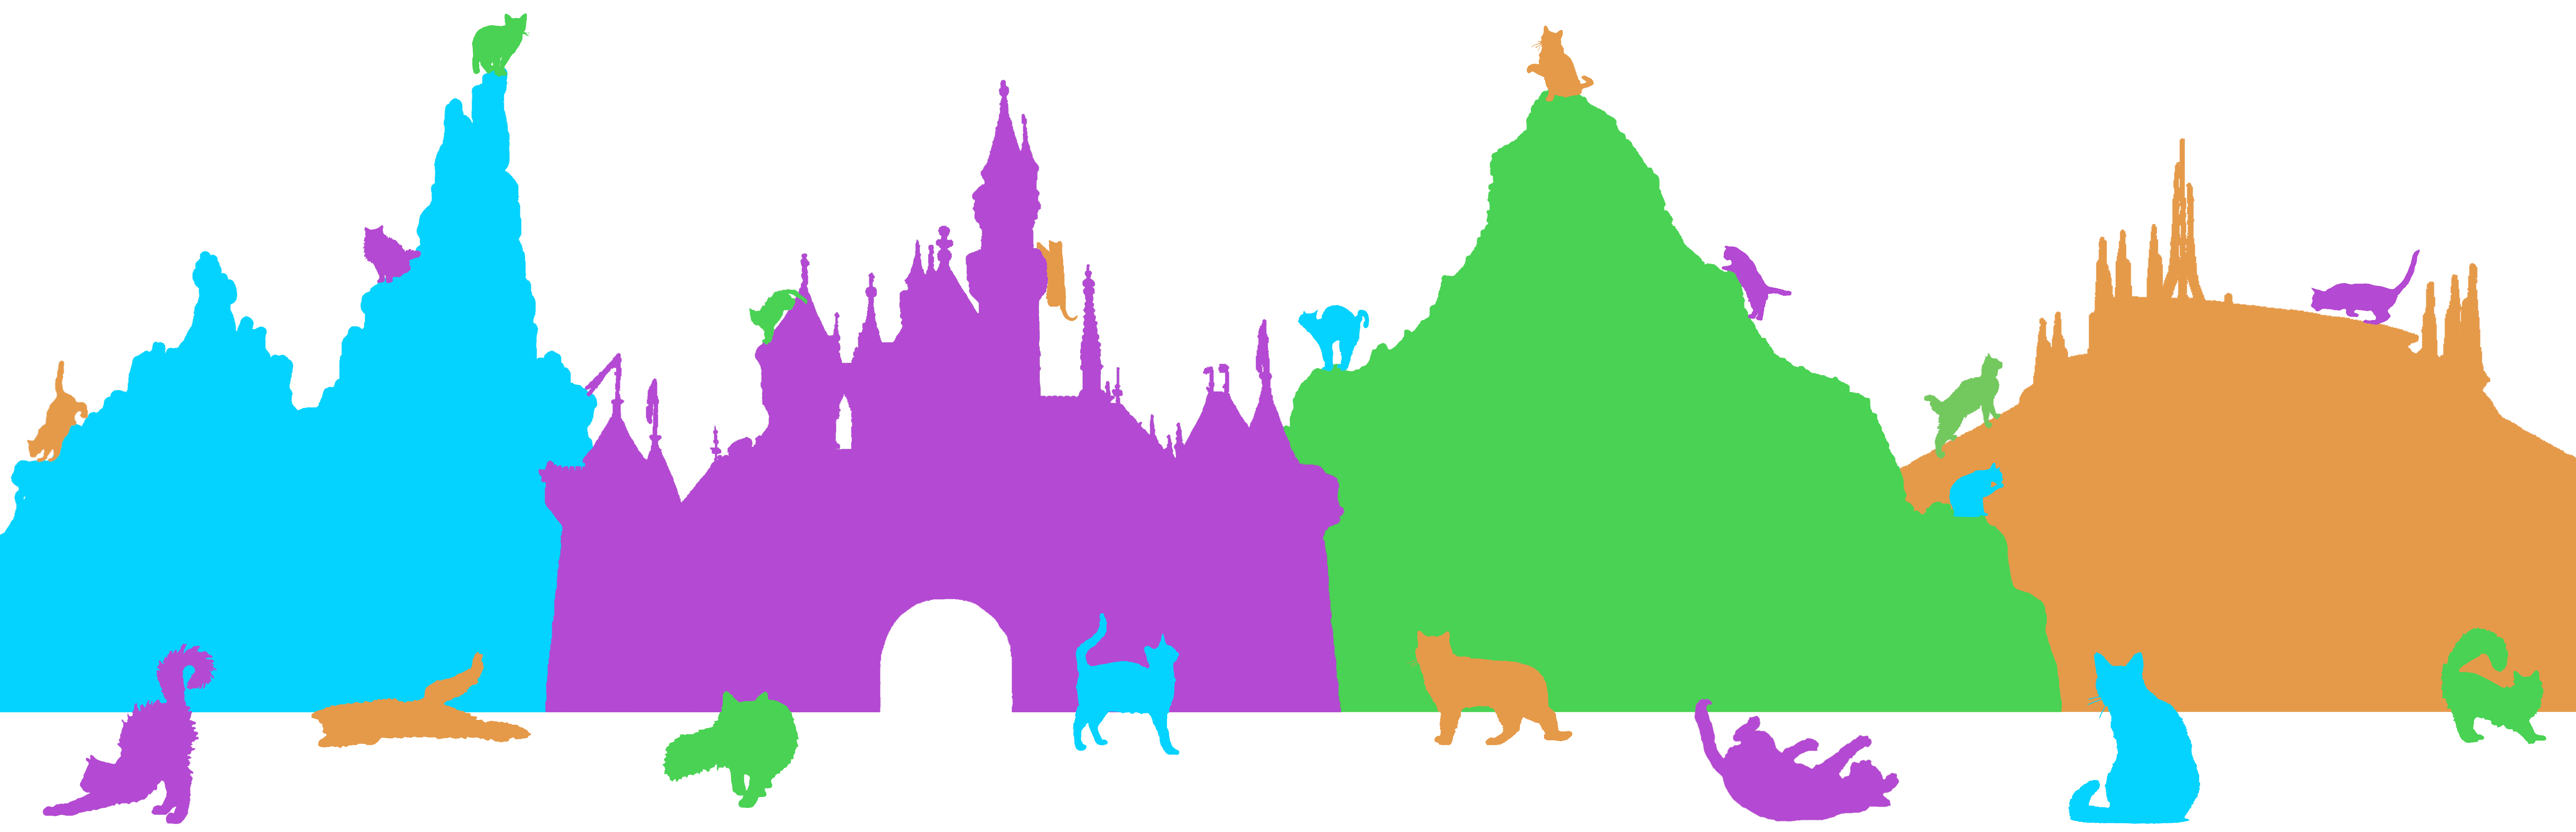 All The Disney Cats